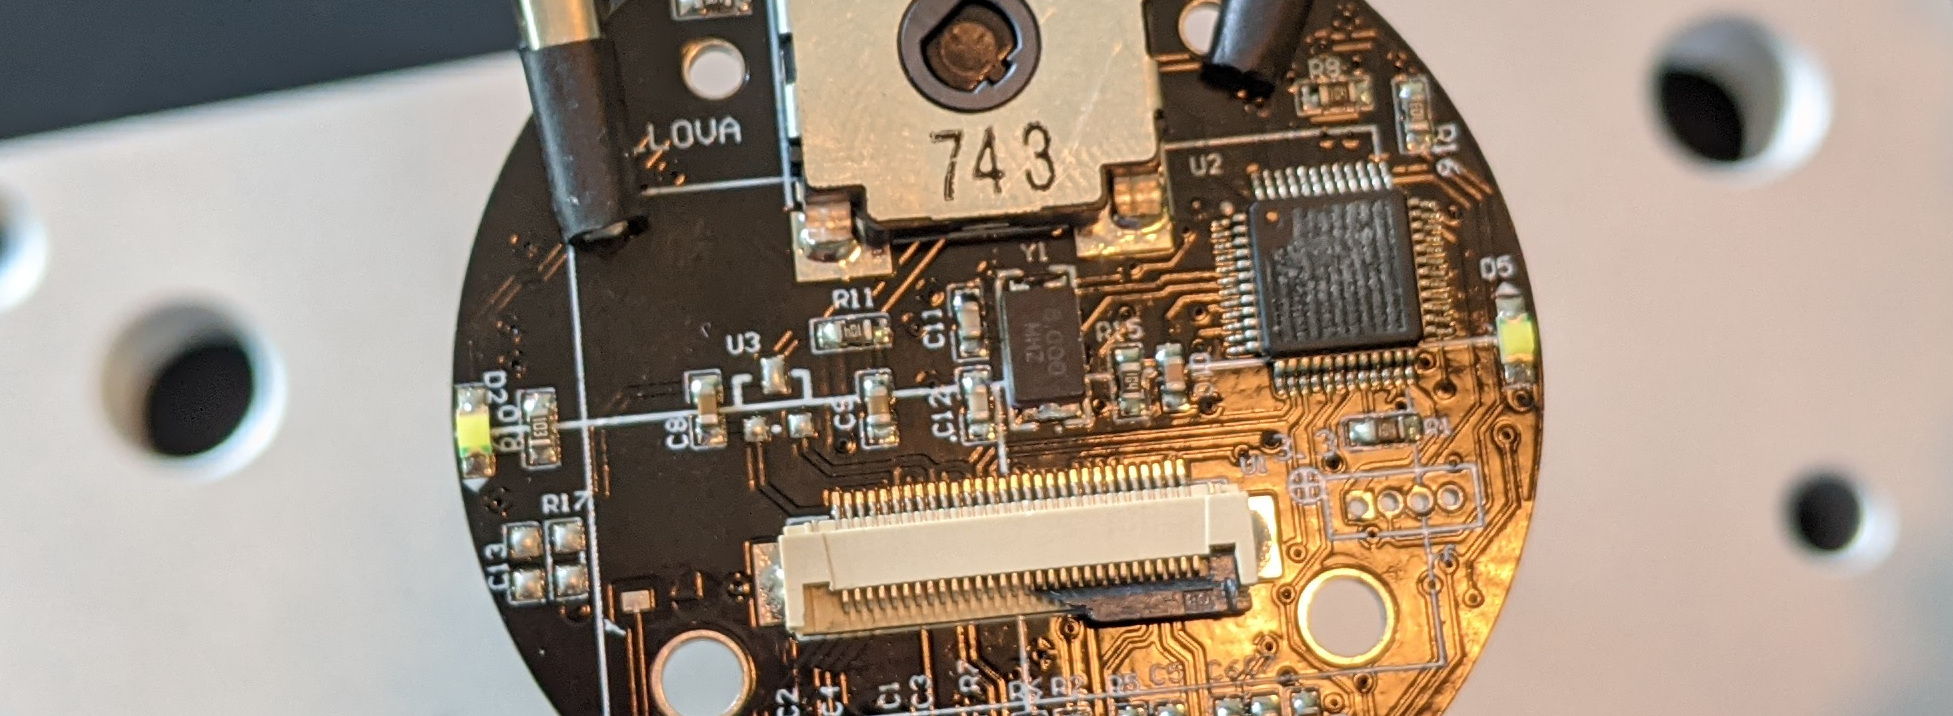 Photo of the board with the original STM32 chip